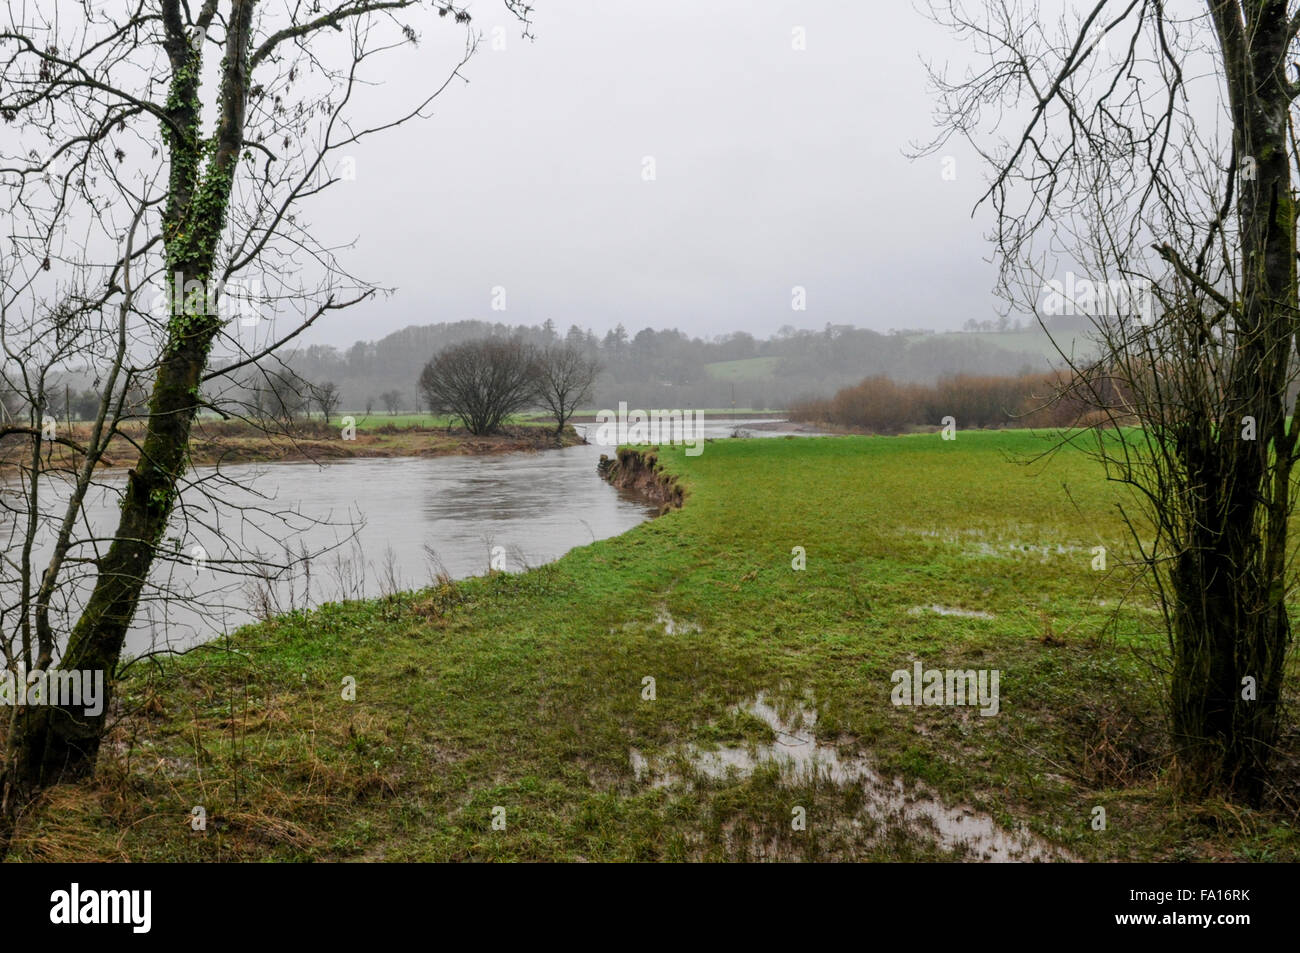 South Wales, UK, Tuesday 15th December 2015. The river Towy flows towards Carmarthen. Viewed from B4300. NOTE - Picture taken Tuesday 15th December 2015. Image is one of two. Prior to flooding. Credit:  Algis Motuza/Alamy Live News Stock Photo